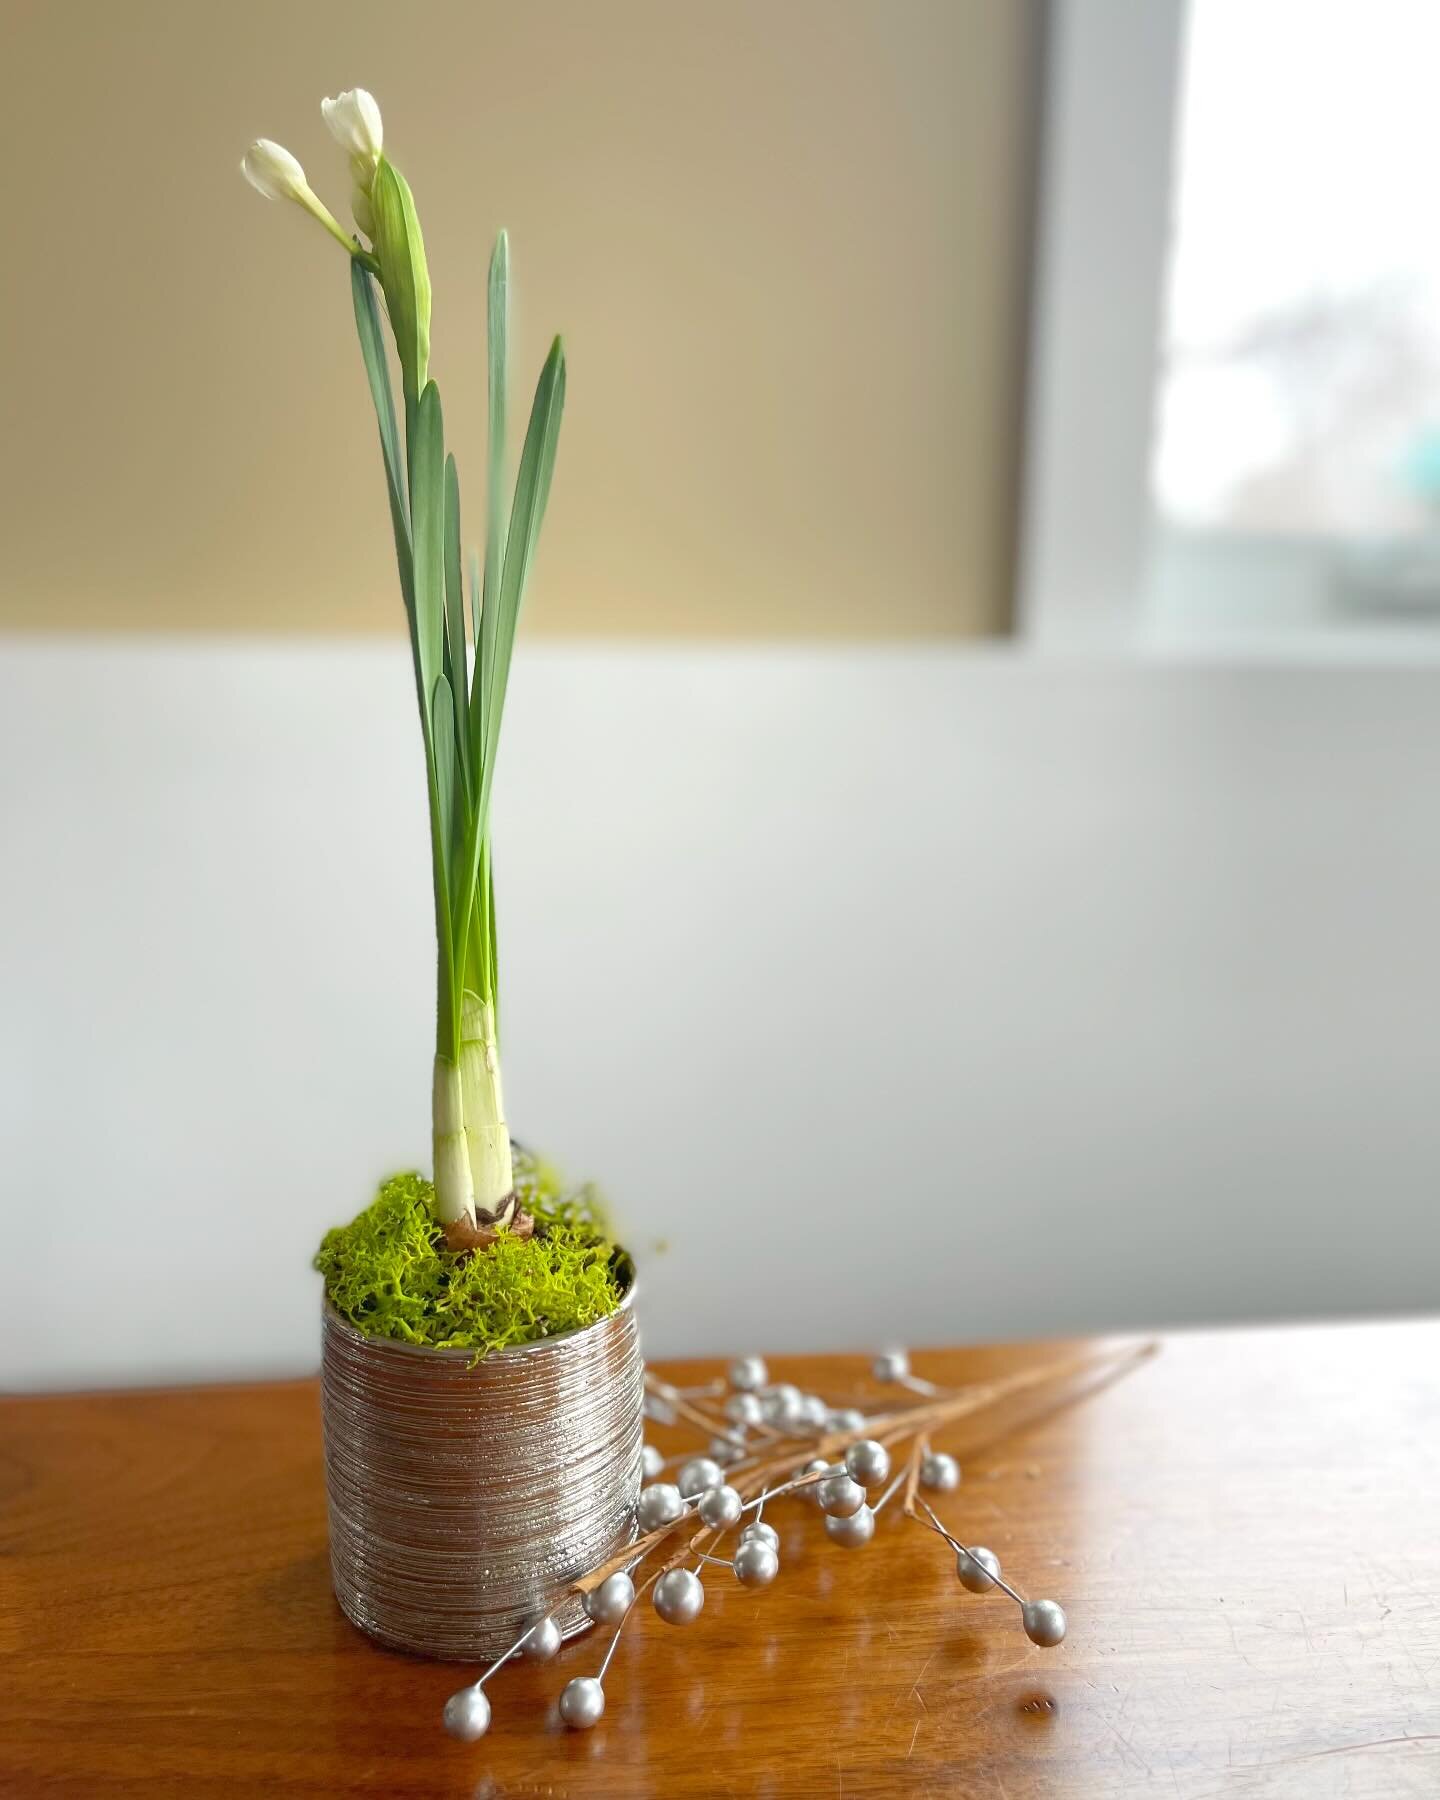 Just added paperwhite gardens and hosting gifts back to our website! And potted amaryllis are growing and ready to head out the door too! 

Want to make a custom garden gift and choose your own bulbs + pot? DM me and we will make it happen!

#reddoor